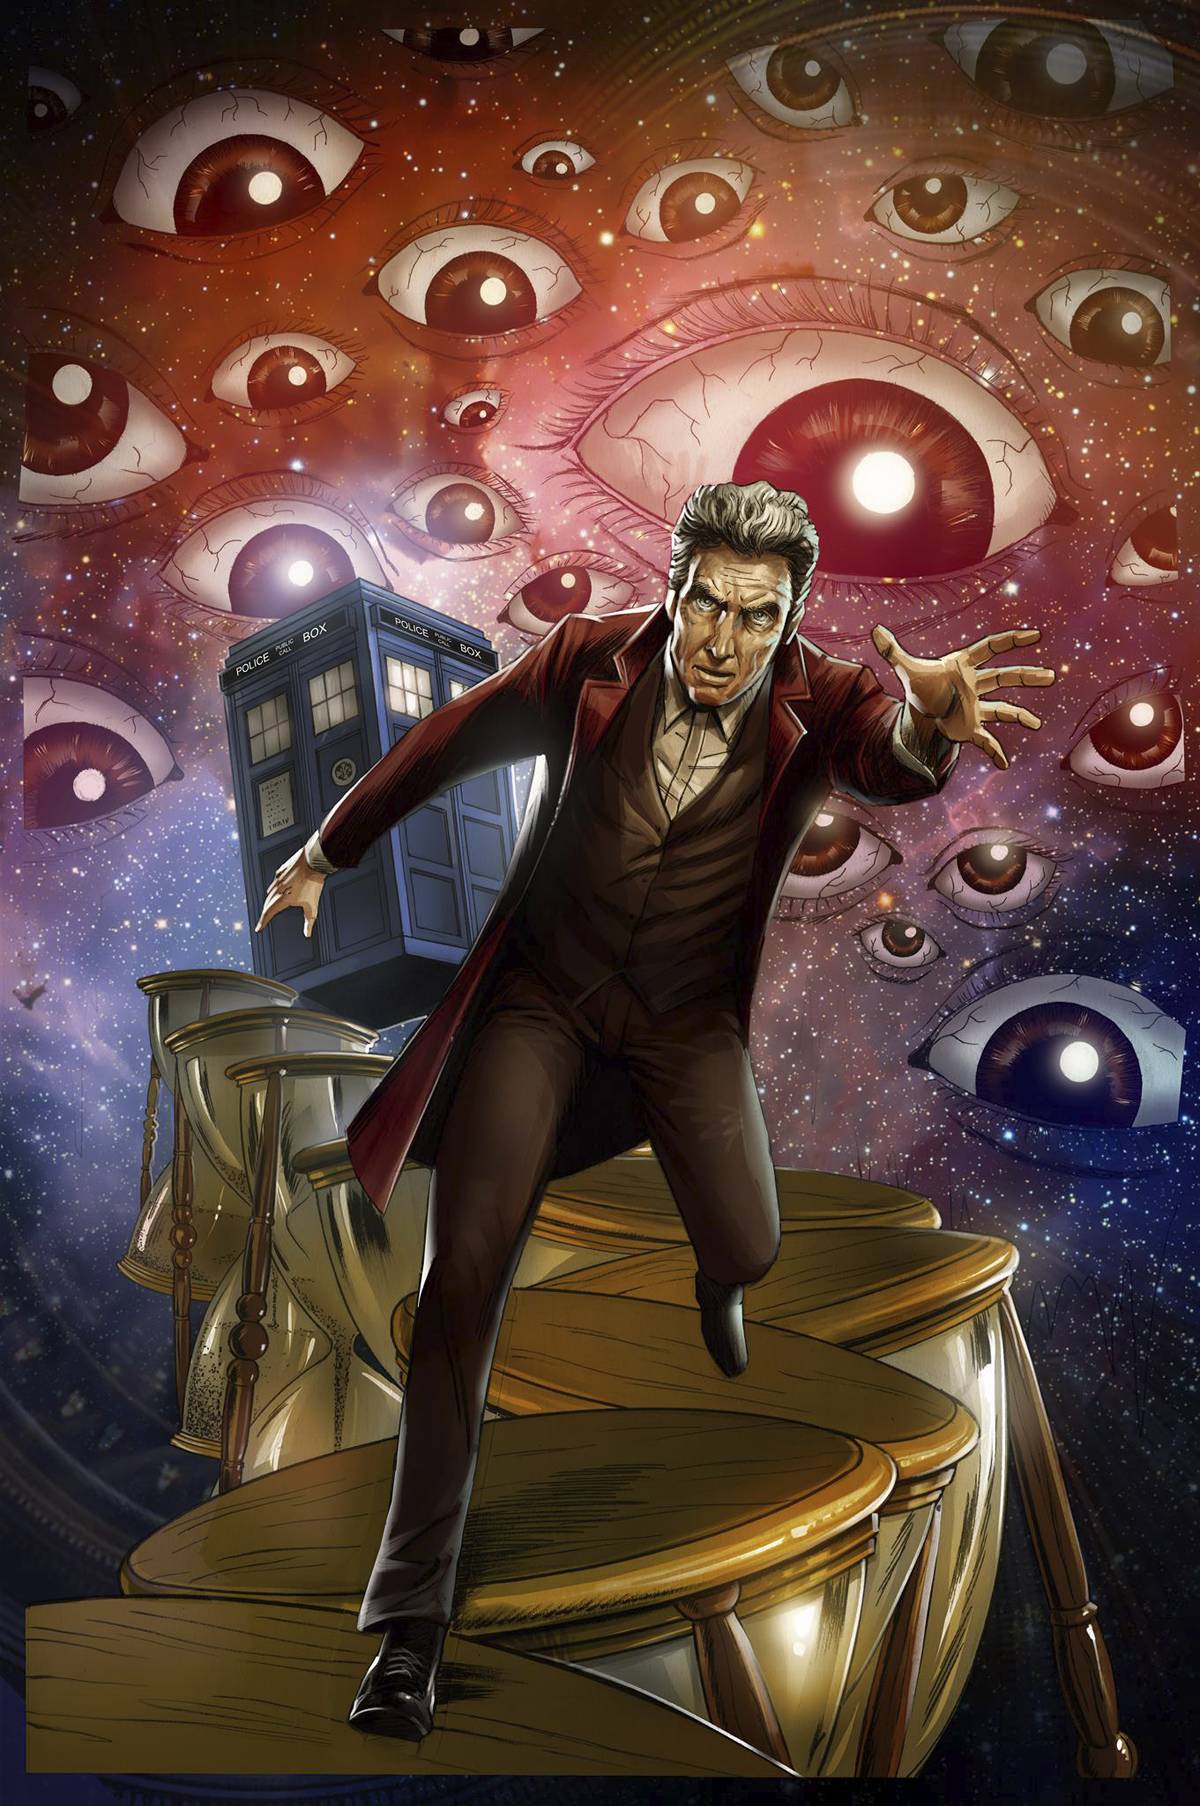 DOCTOR WHO: GHOST STORIES#4